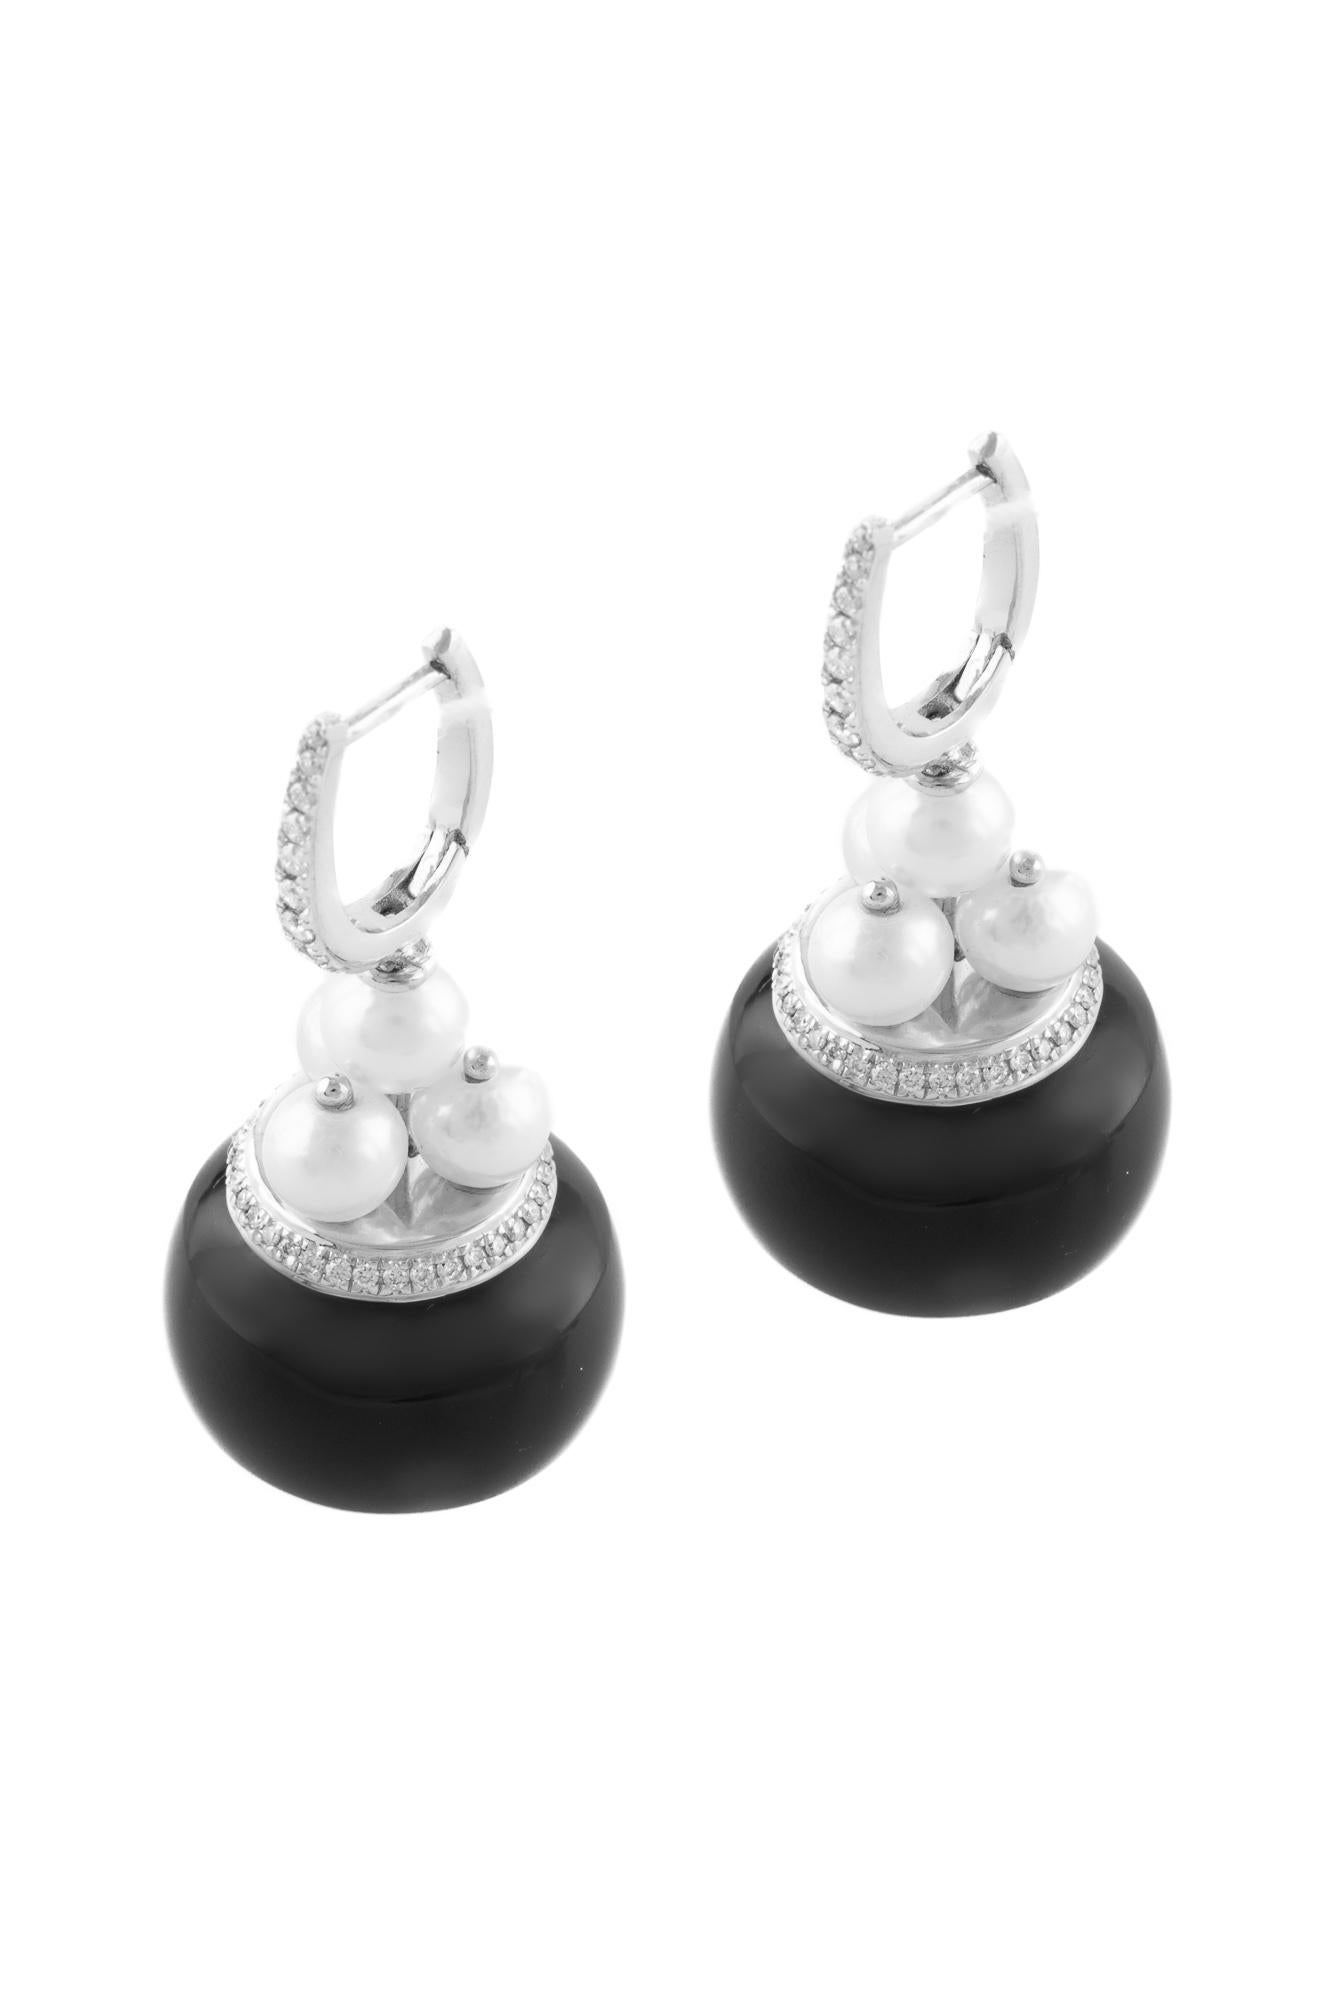 Atelo’s Boule Collection combines voluminous shapes with vivid colours, resulting in bold, free-spirited pieces with a charming elegance.

These stunning earrings in 18 karat white gold are made with black onyx, pearls and round diamonds.

South sea